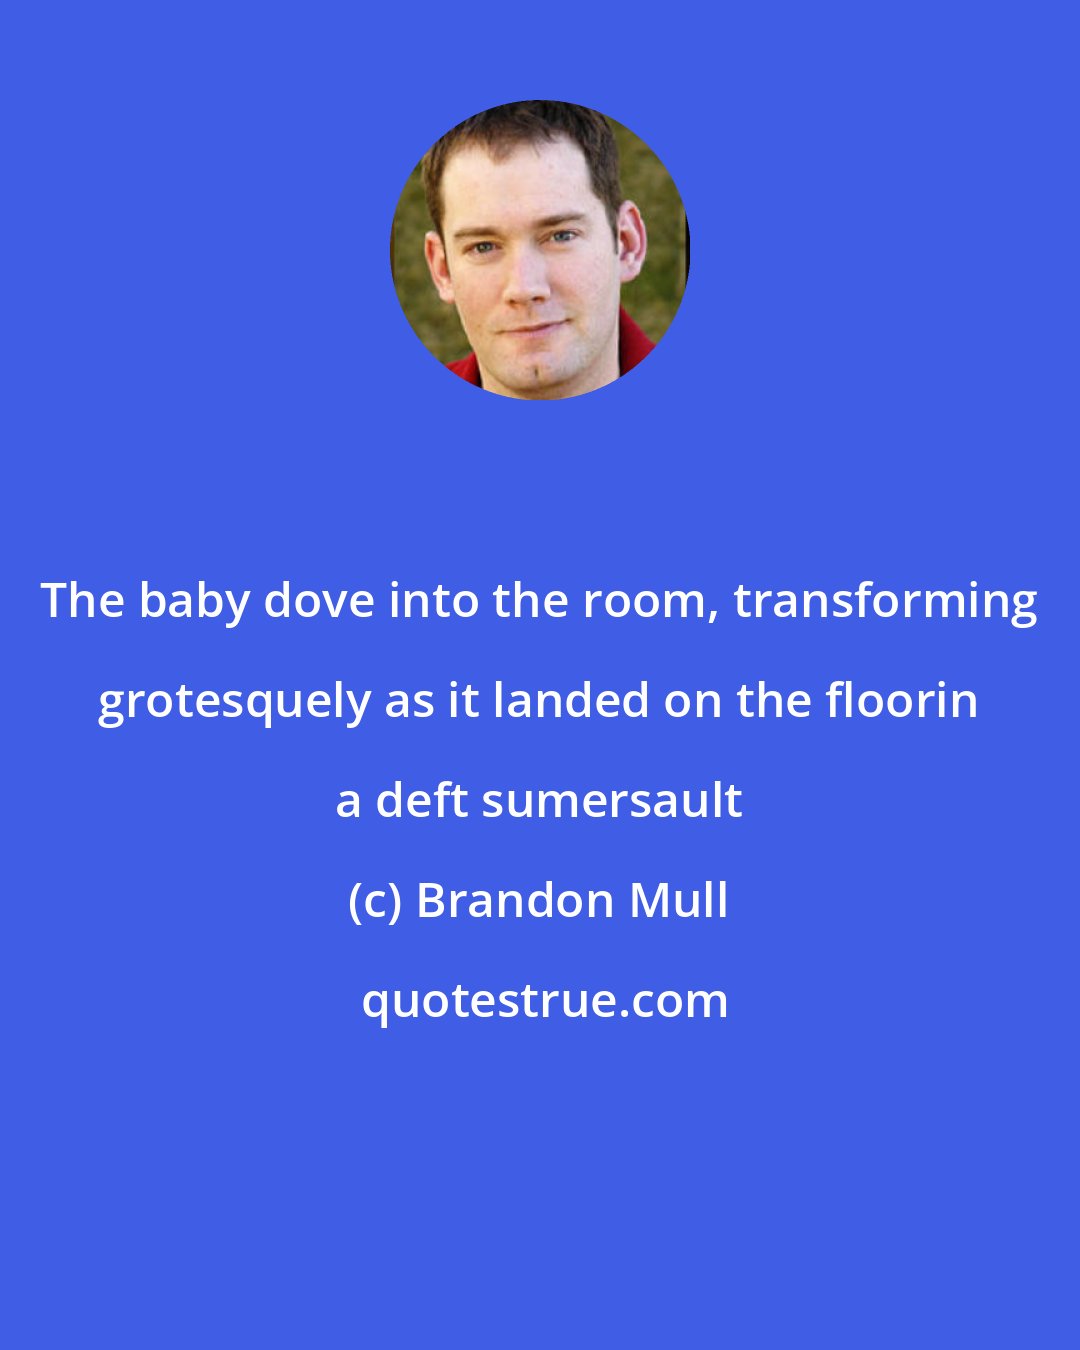 Brandon Mull: The baby dove into the room, transforming grotesquely as it landed on the floorin a deft sumersault